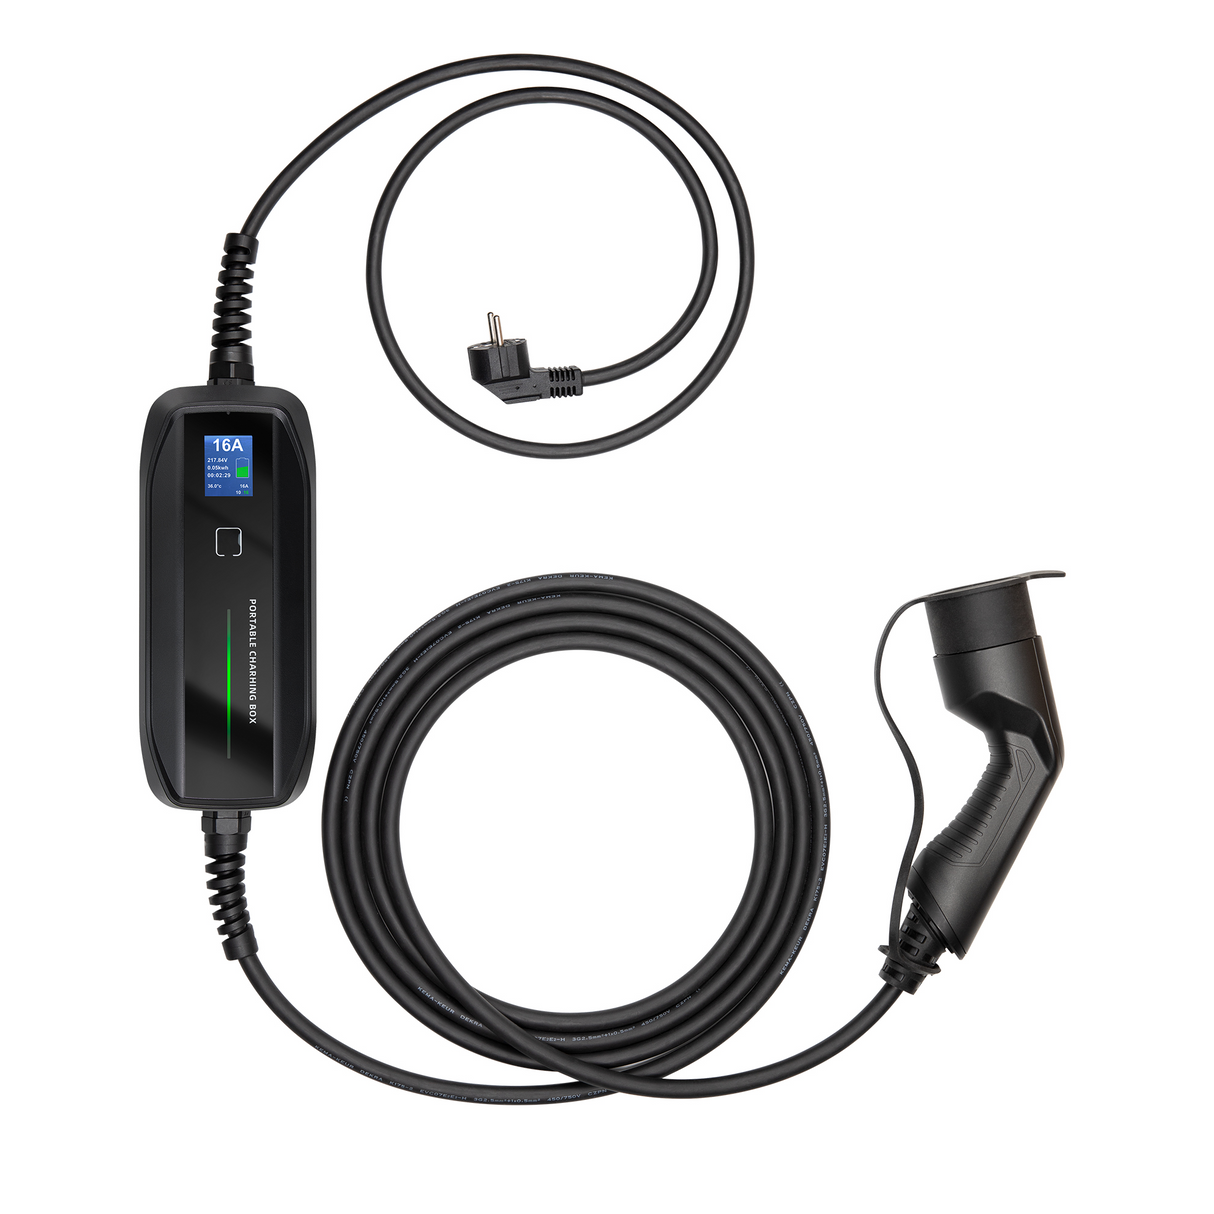 Mobile Charger Renault Kangoo - Besen with LCD - Type 2 to Schuko